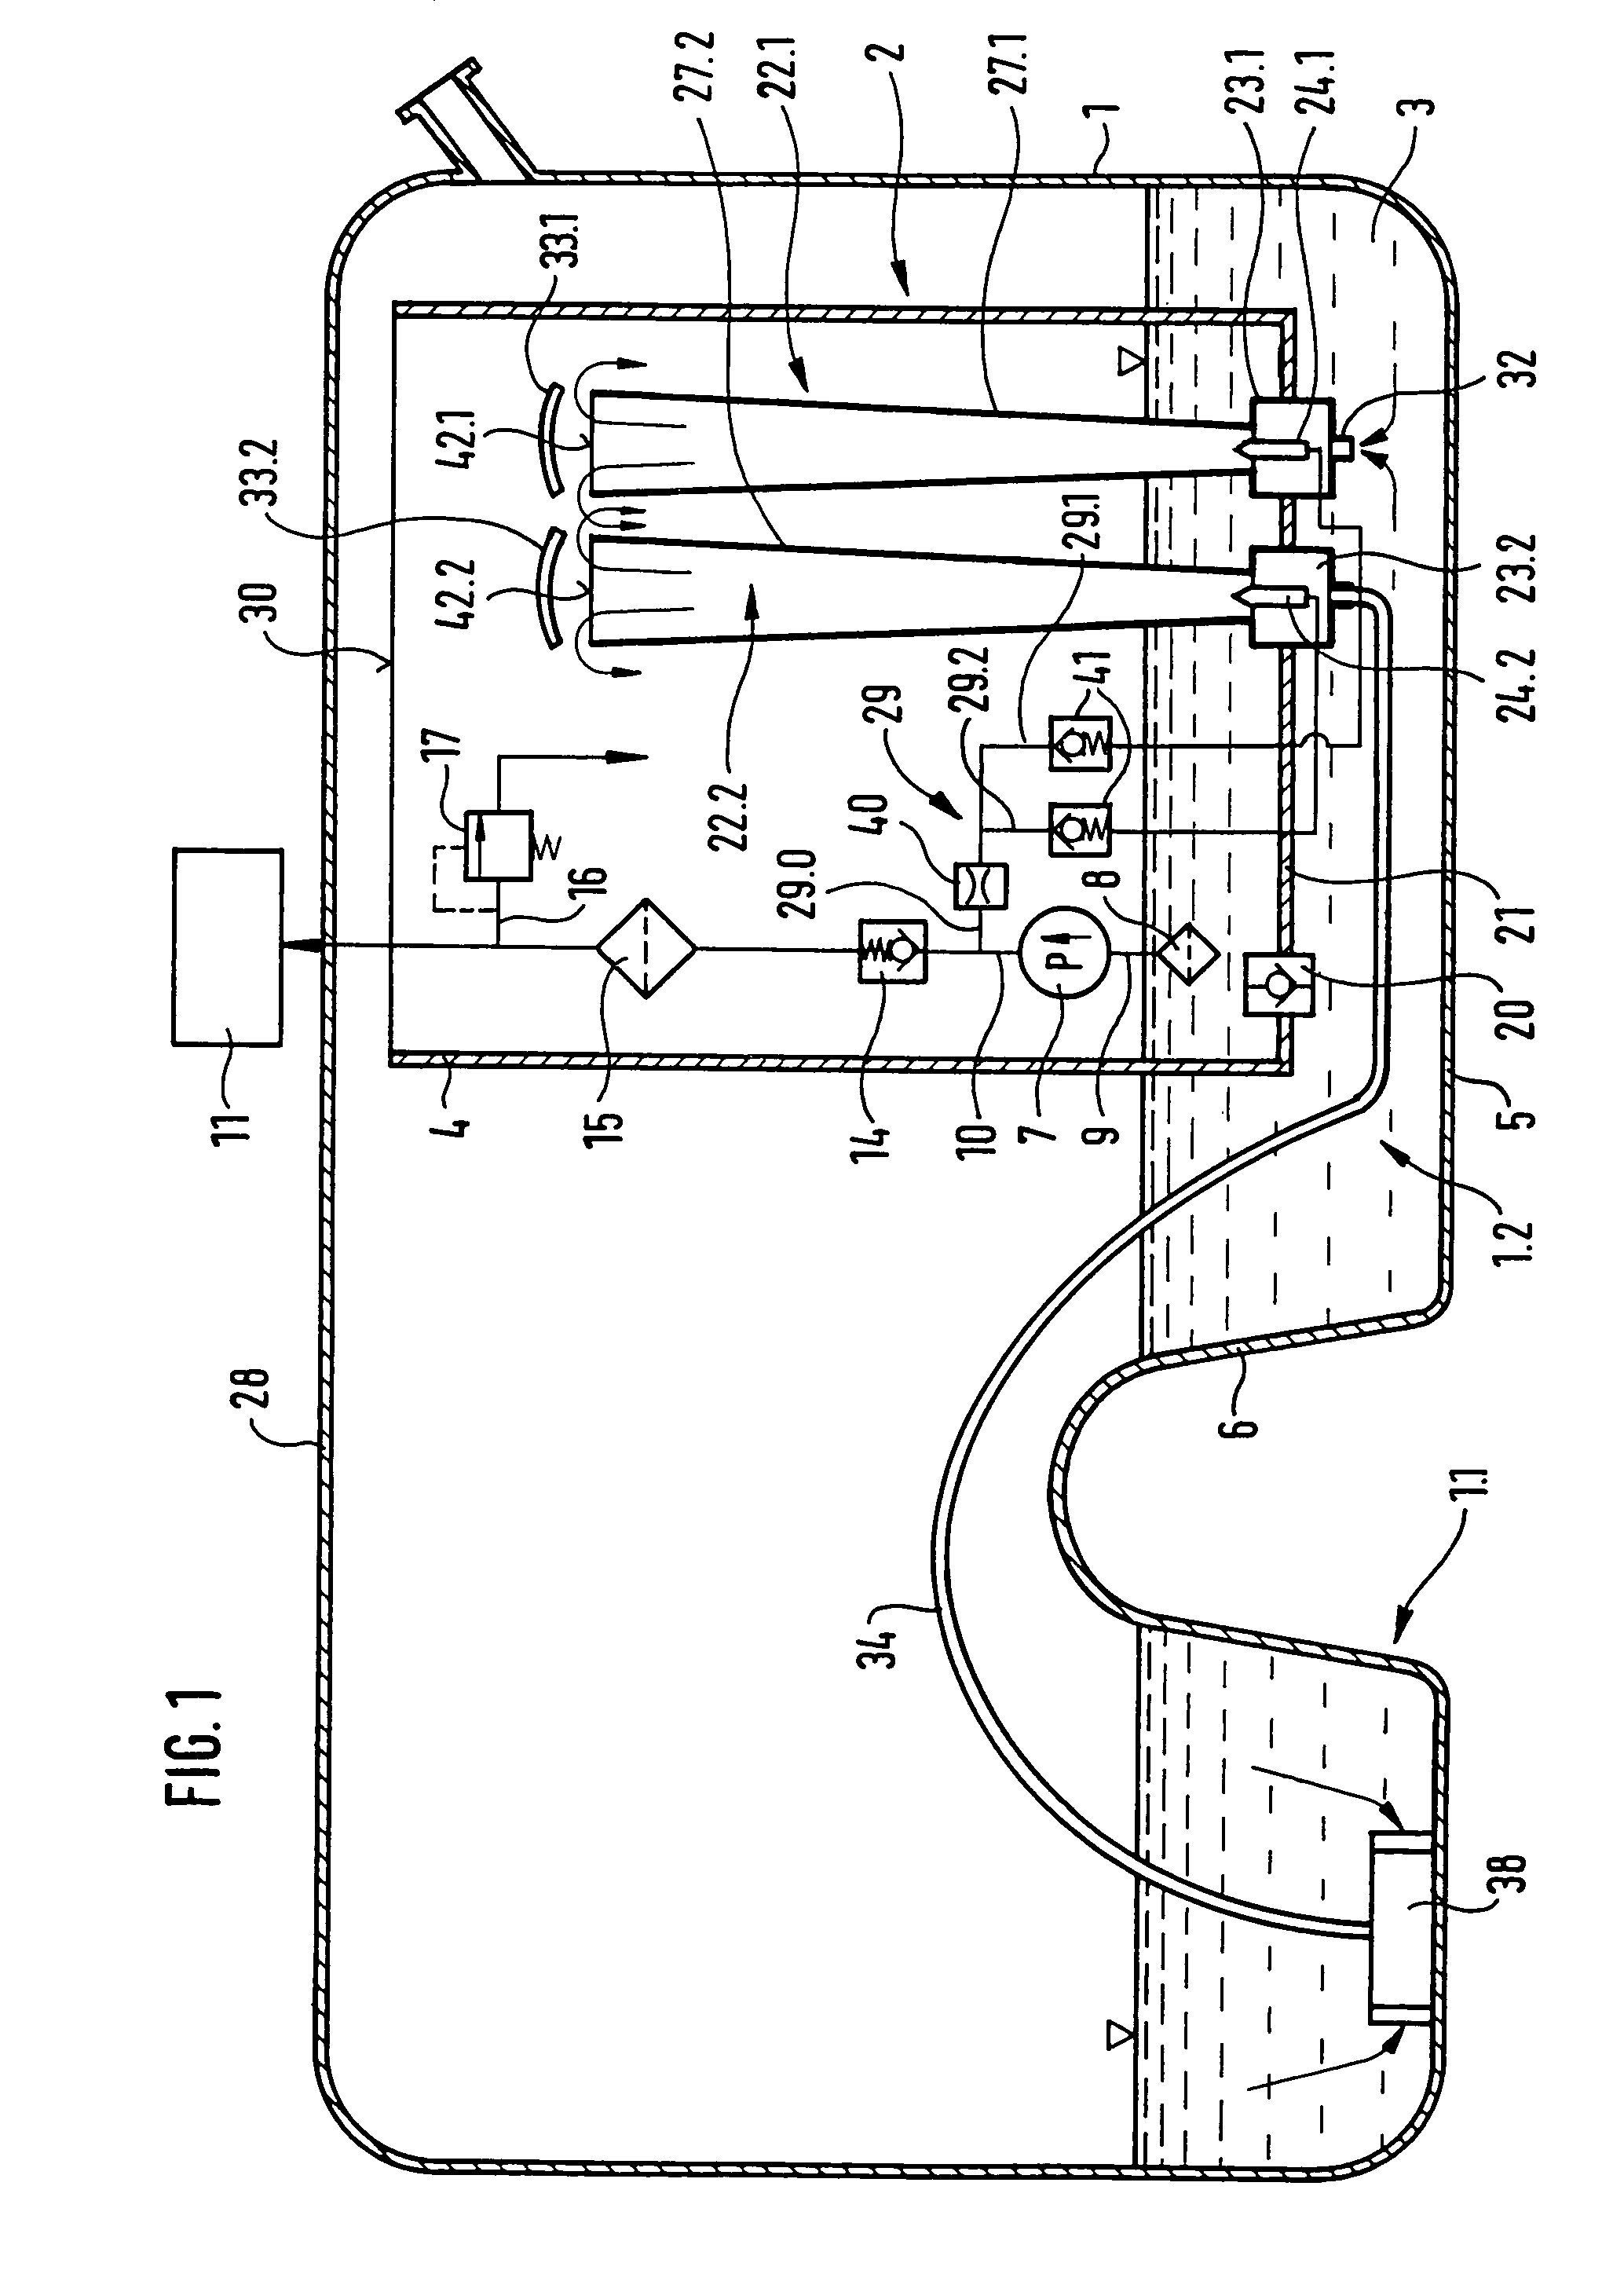 Apparatus for delivering fuel from a tank to an internal combustion engine